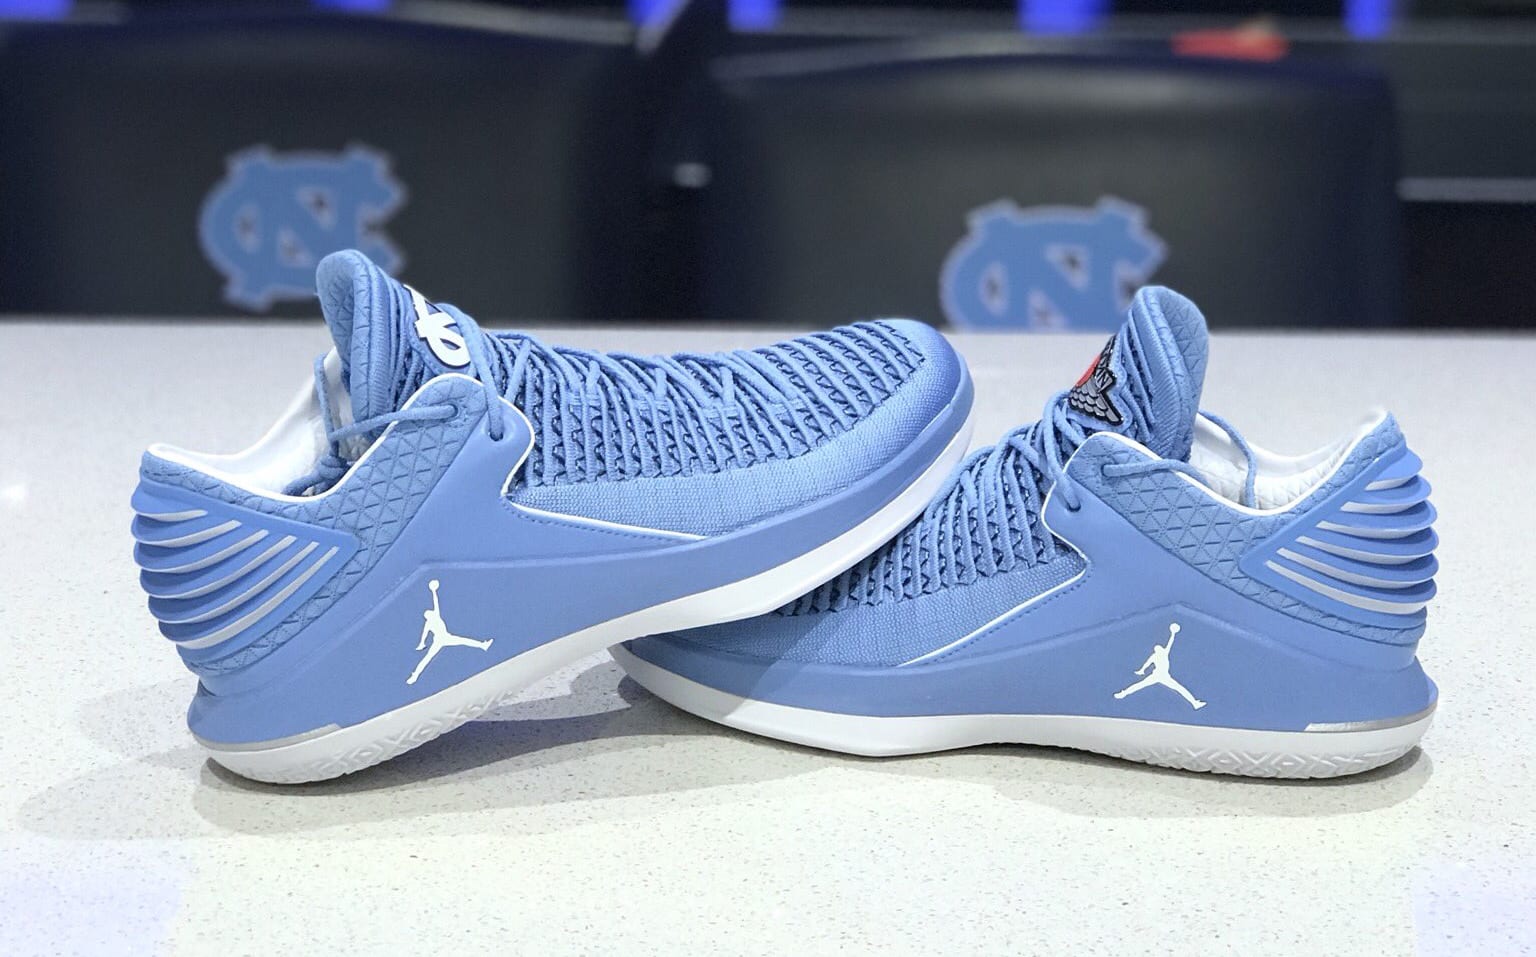 North Carolina player exclusive shoes